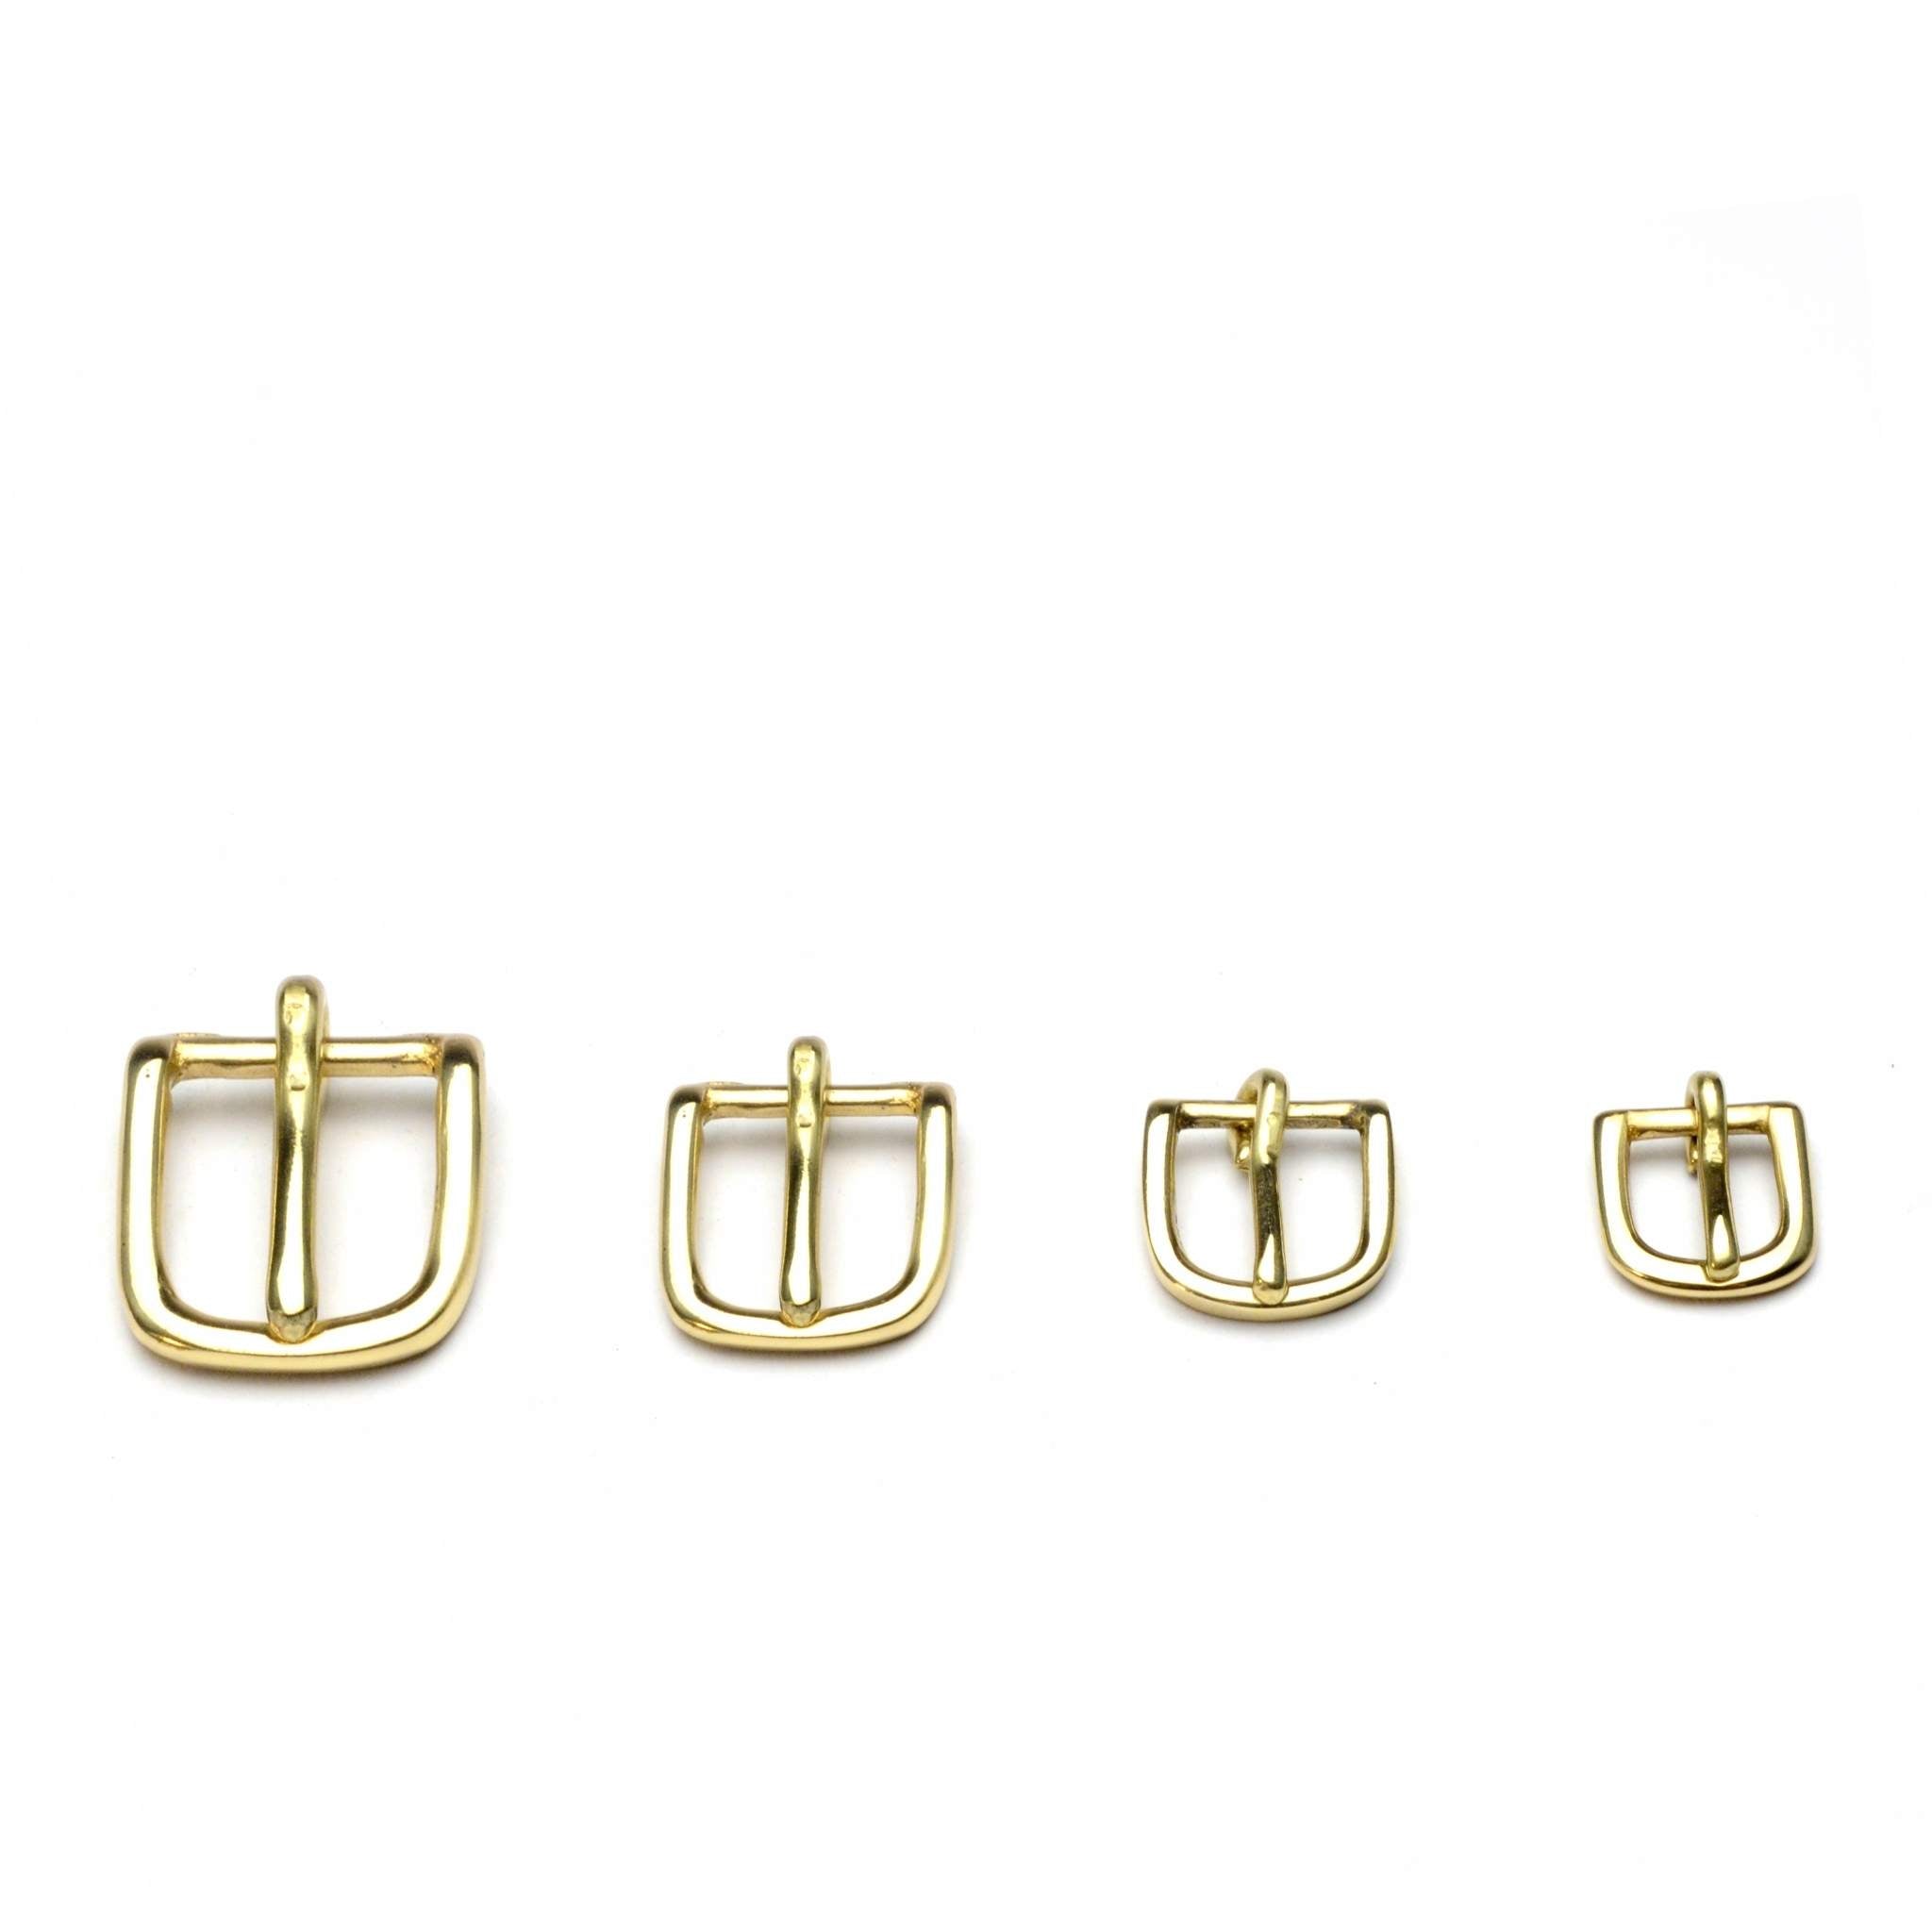 Brass  plated steel solid frame general purpose strap buckle. Ideal for leather watch straps, bag and satchel straps, pet collars, arm braces etc.